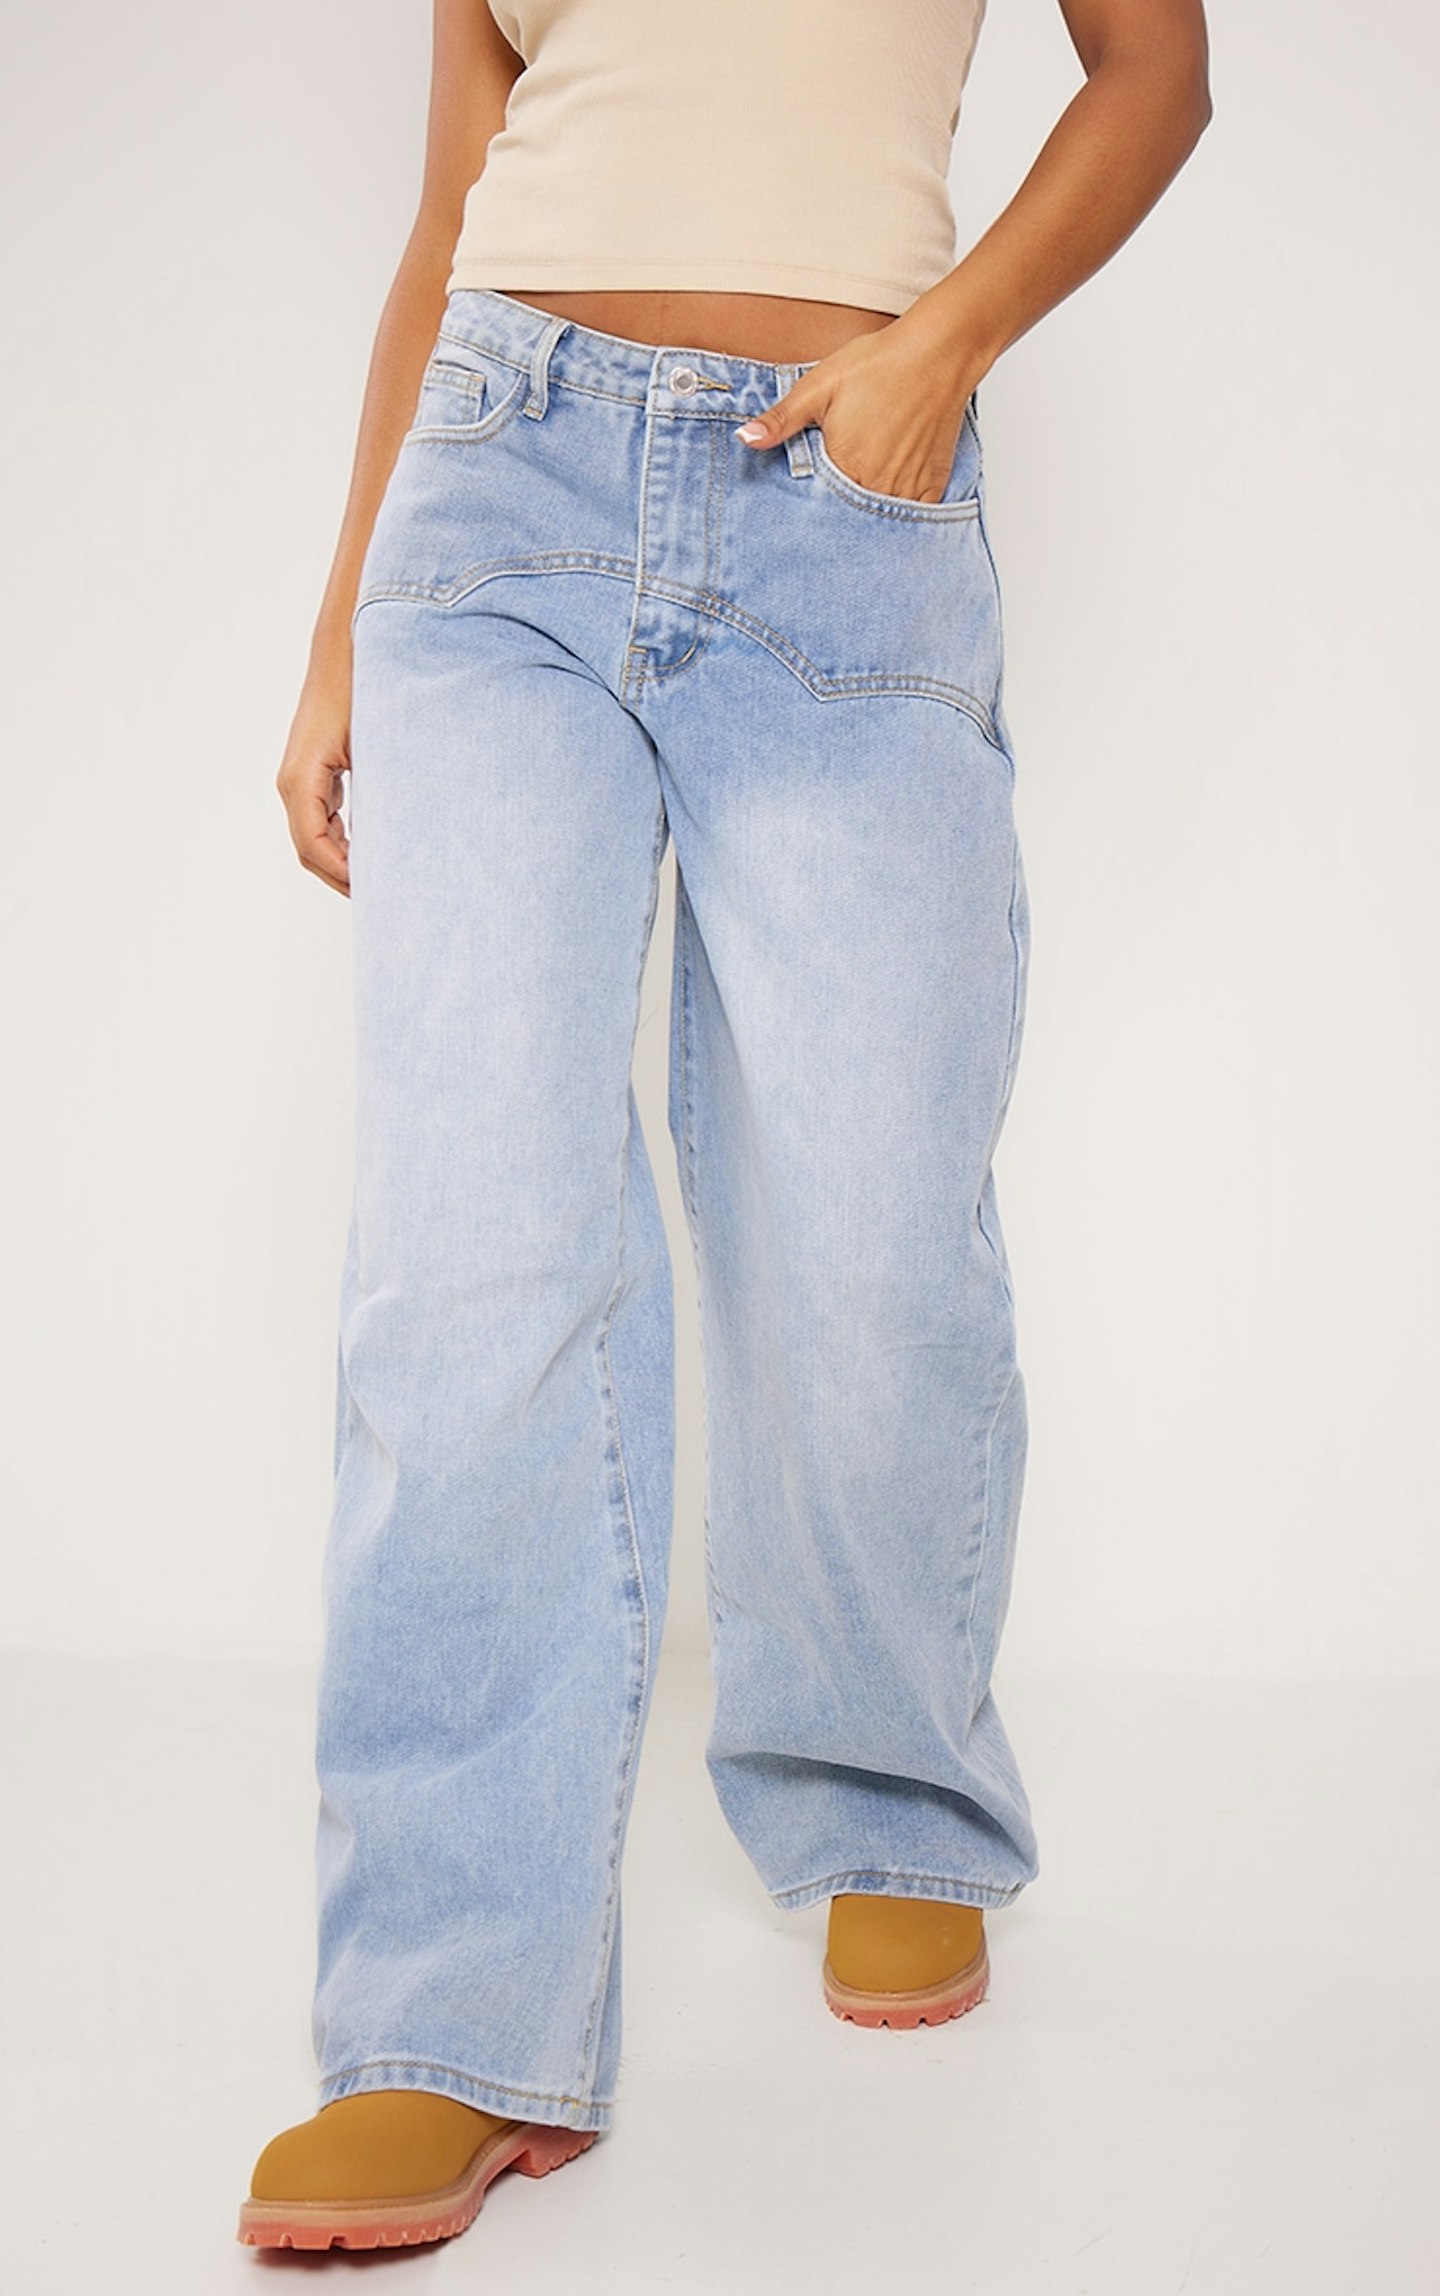 Pretty Little Thing Light Blue Wash Jeans